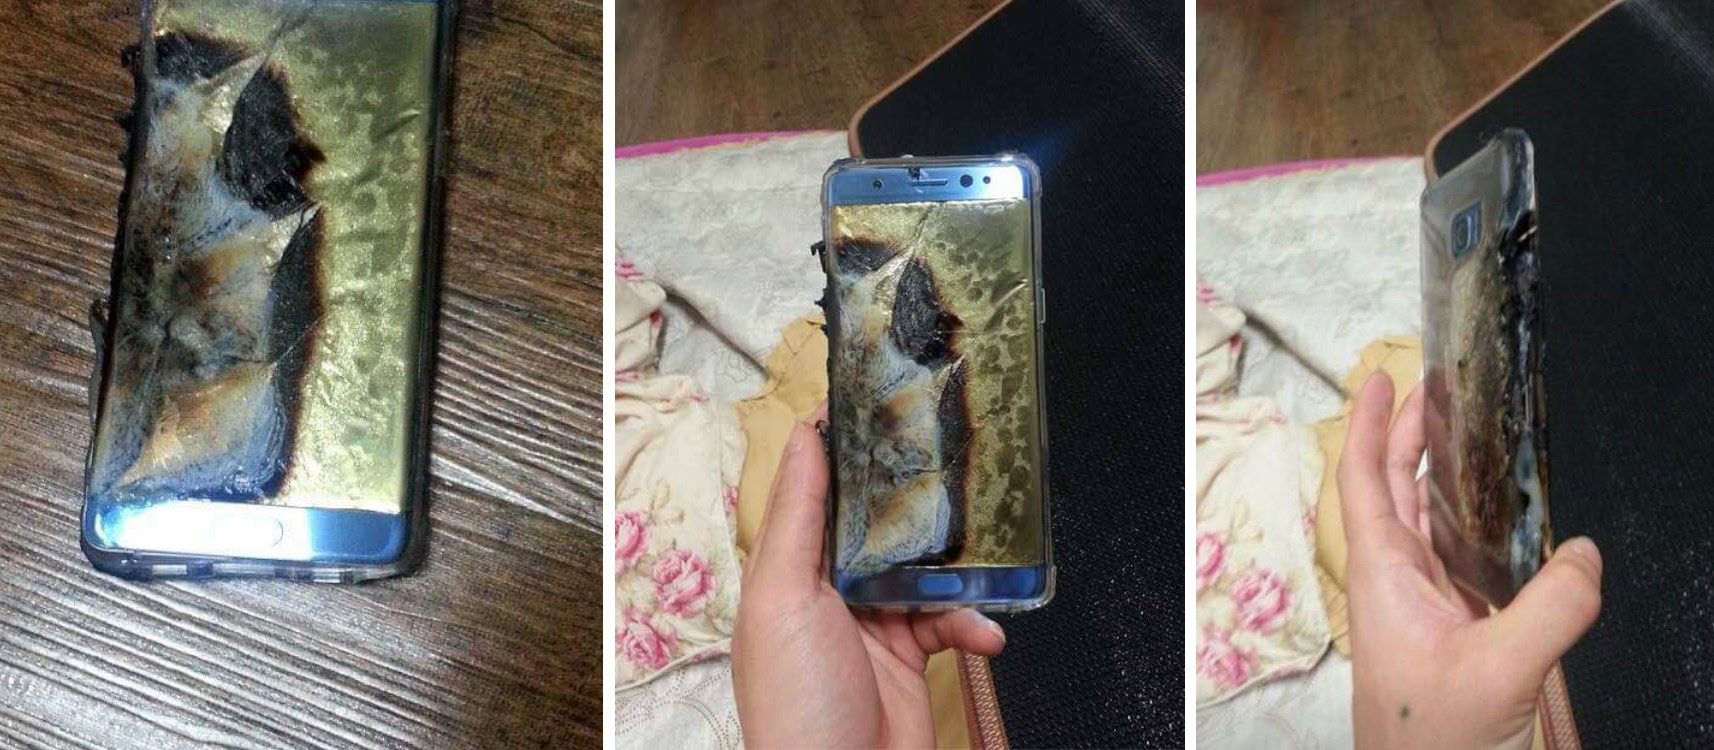 Derfor vil beslutte Bugsering Why do phones explode, and what can you do to protect yourself?